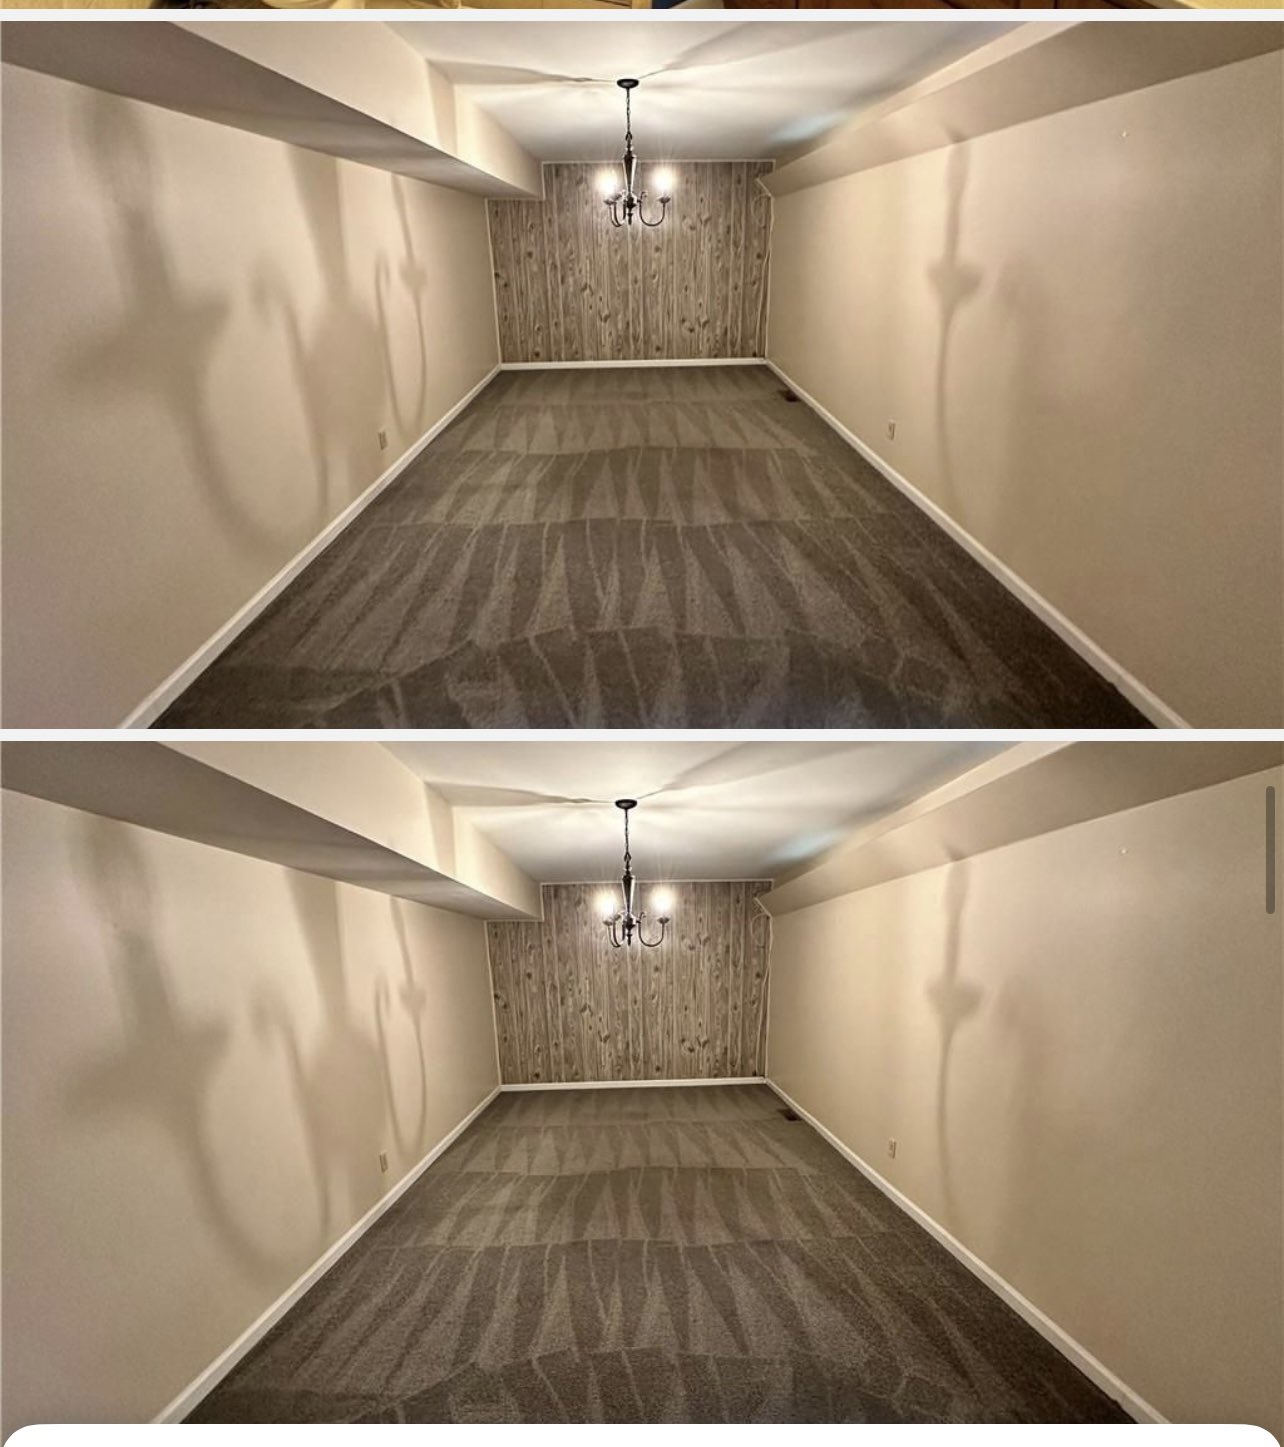 cursed zillow photo - ceiling - Wan